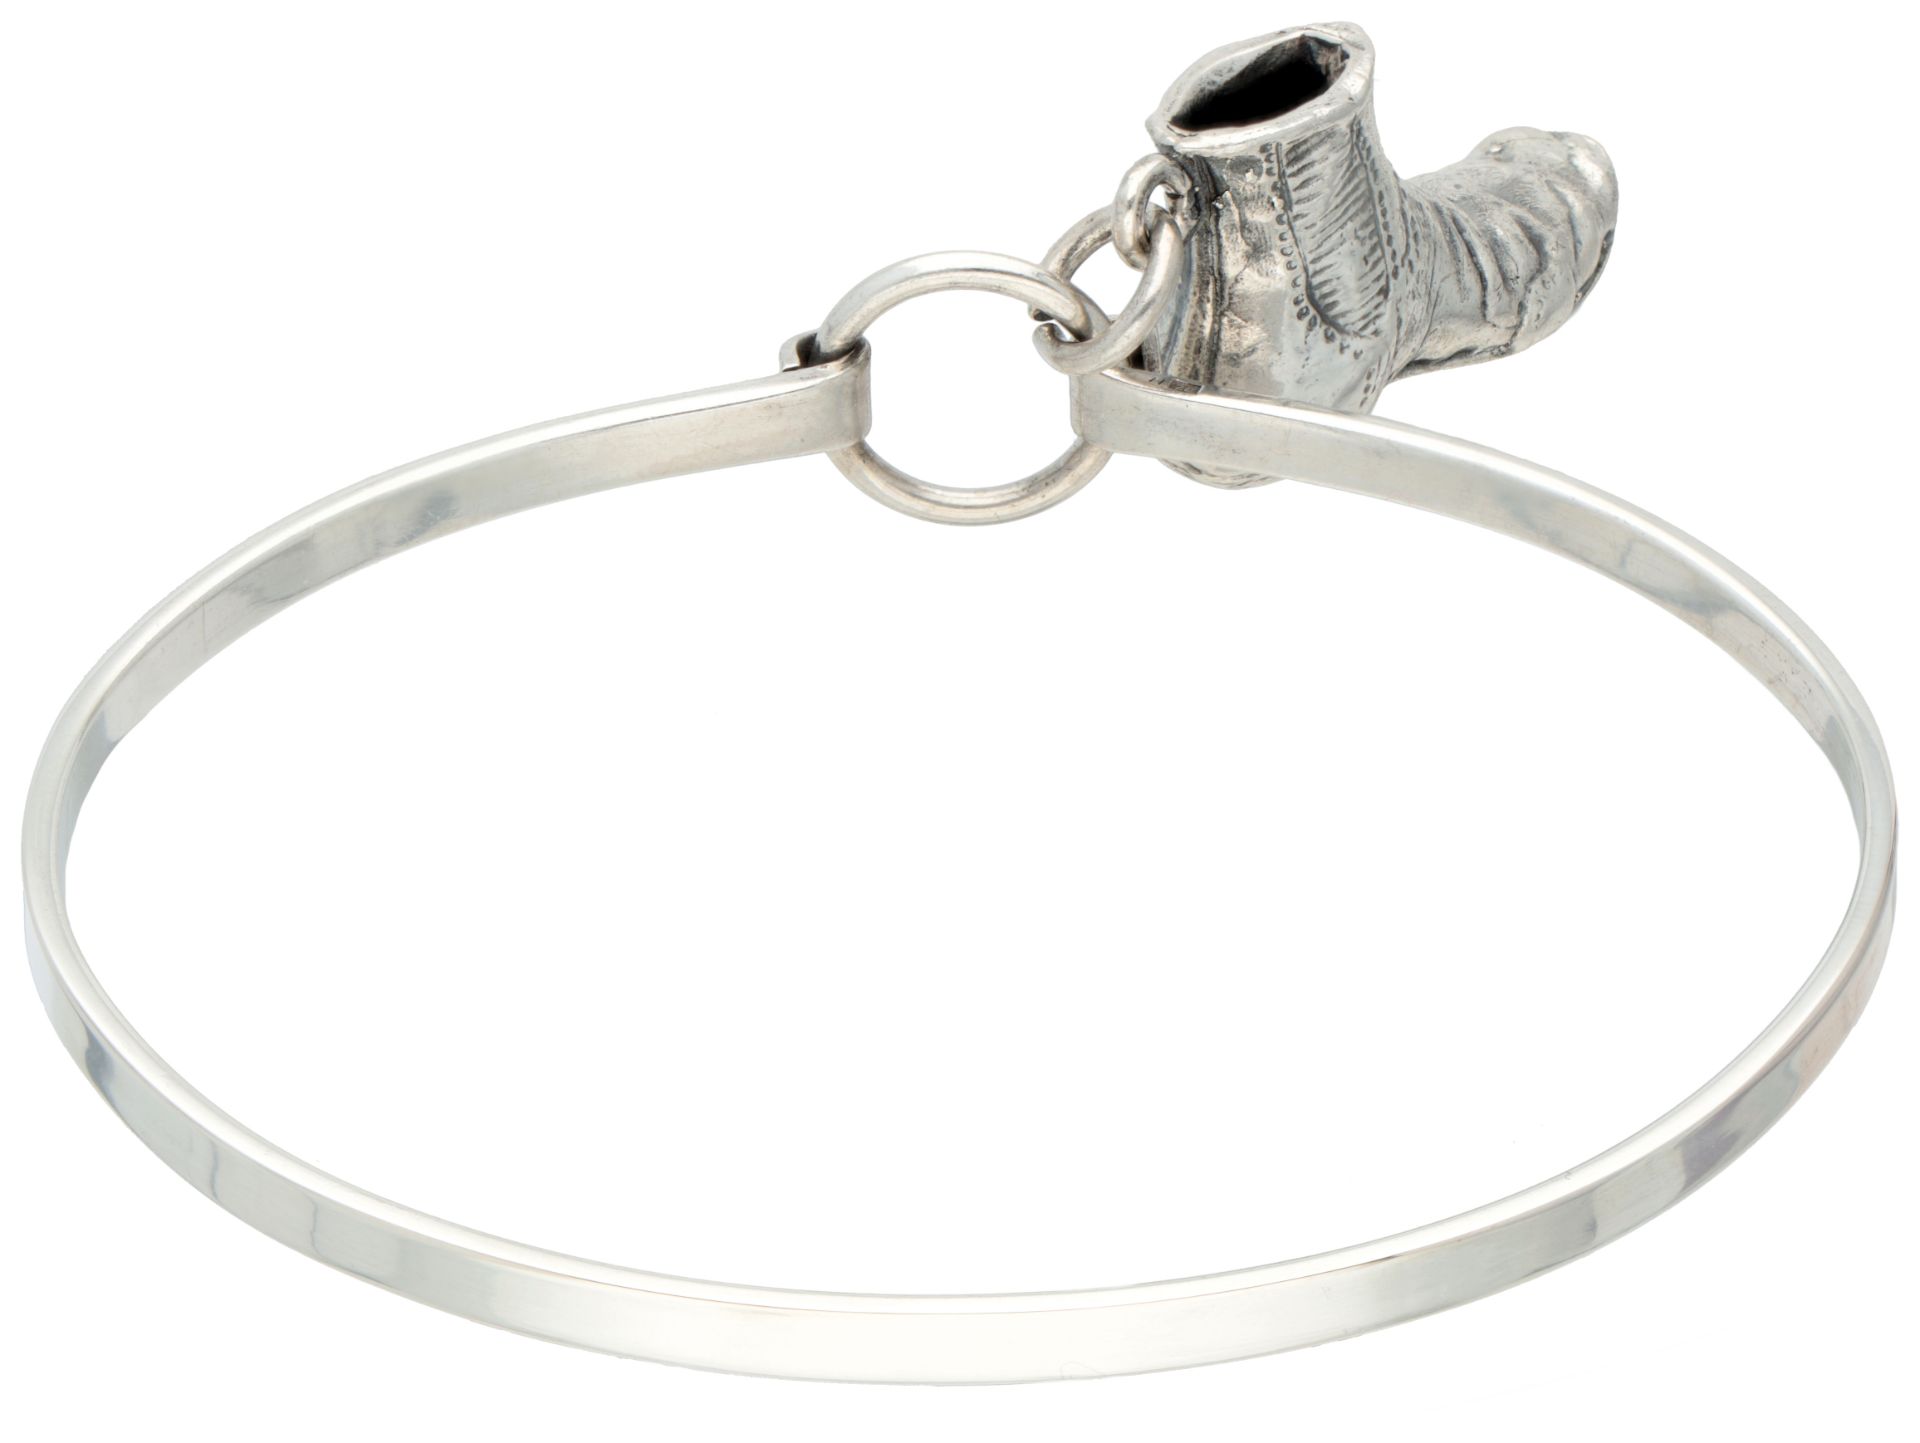 Finnish 835 silver bangle with charm of a shoe. - Image 3 of 5